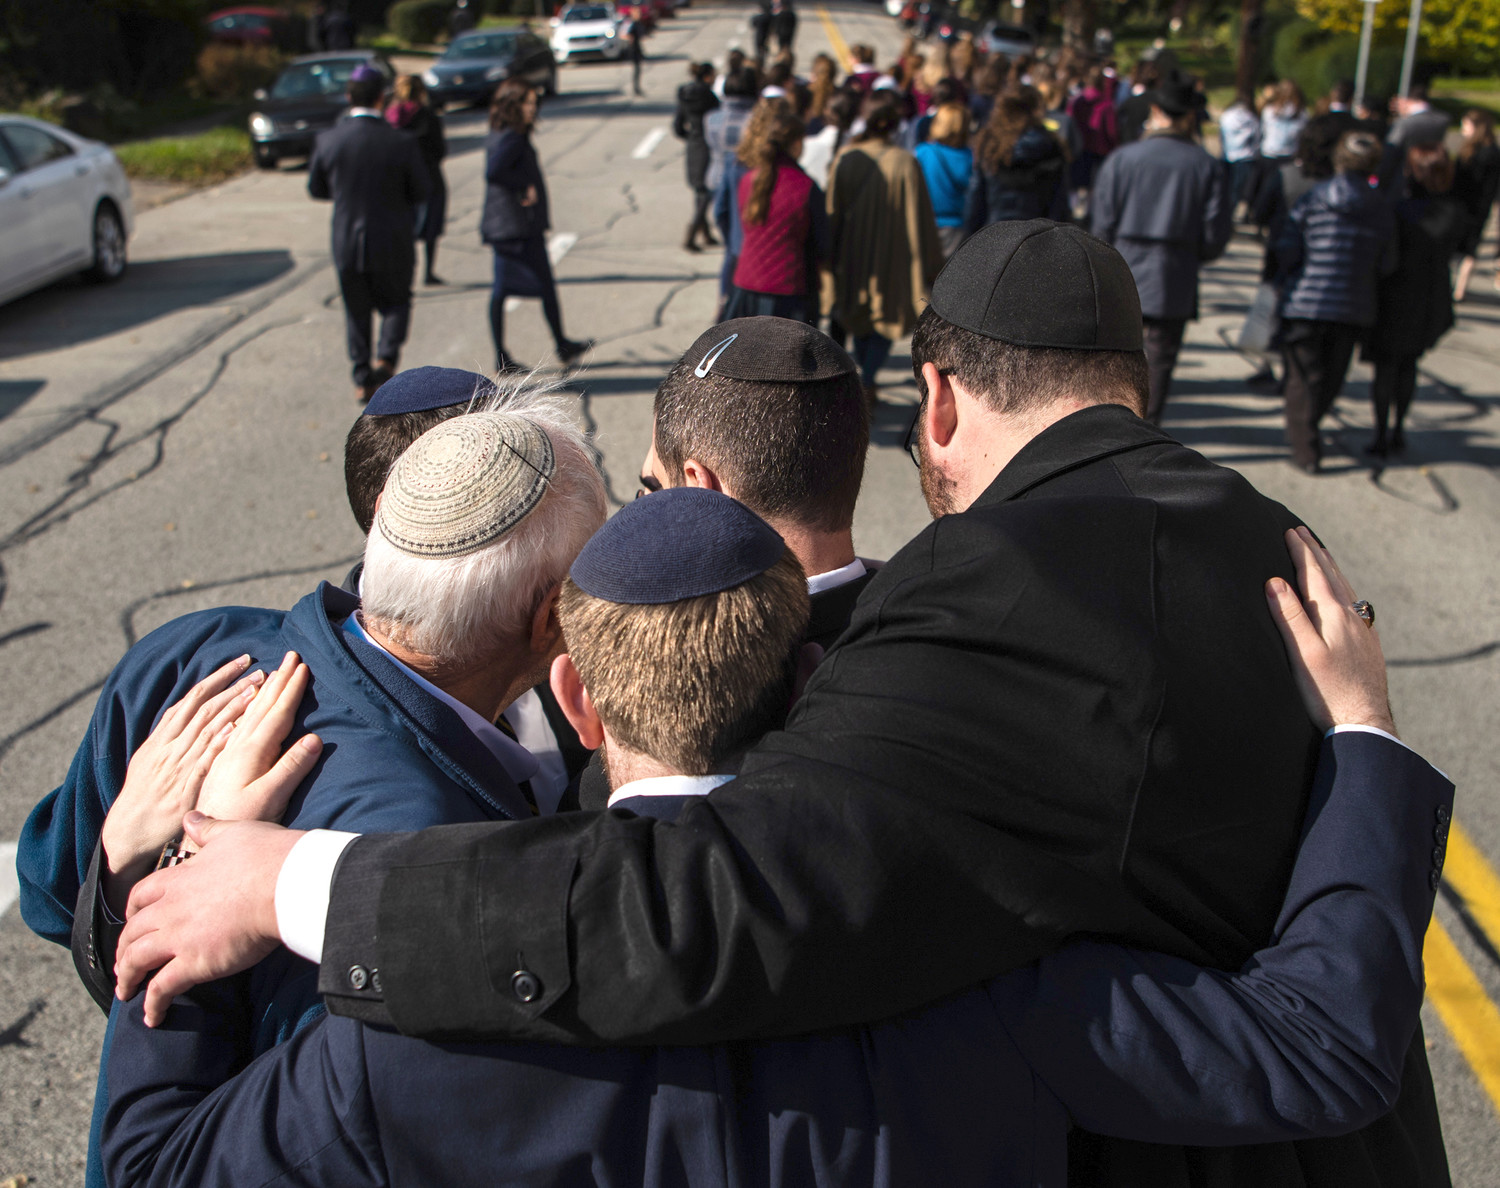 Mourners embrace during outside of Congregation Beth Shalom in Pittsburgh for the funeral of Joyce Fienberg, who was killed at the mass shooting at the Tree of Life synagogue shooting on Oct. 31.